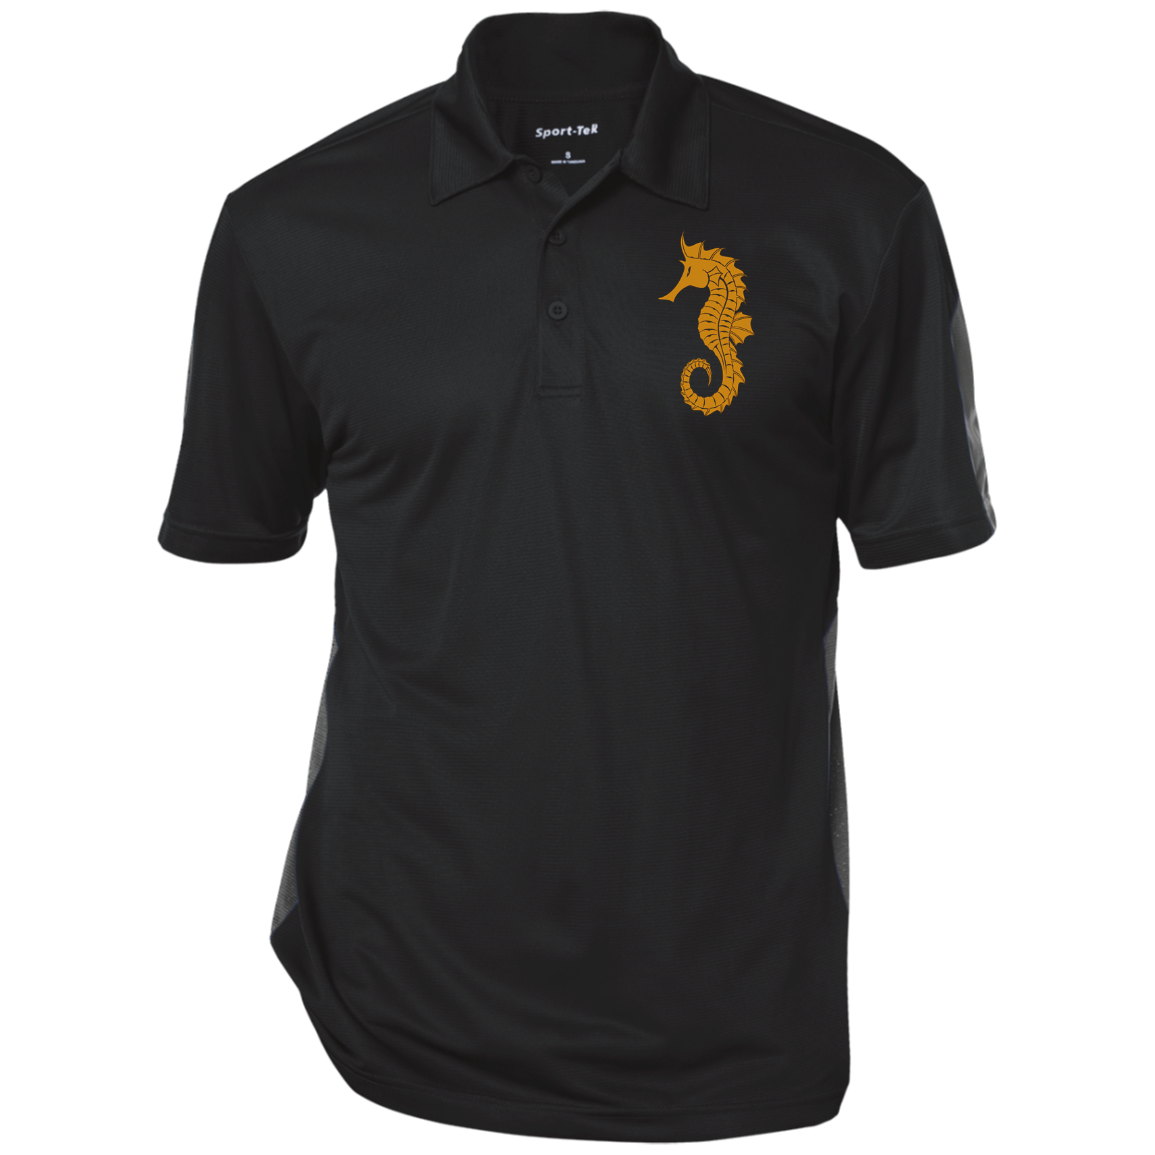 Embroided fatherhood Symbol: "Father Hippocampus" , Seahorse. Performance Textured Three-Button Polo. BARS